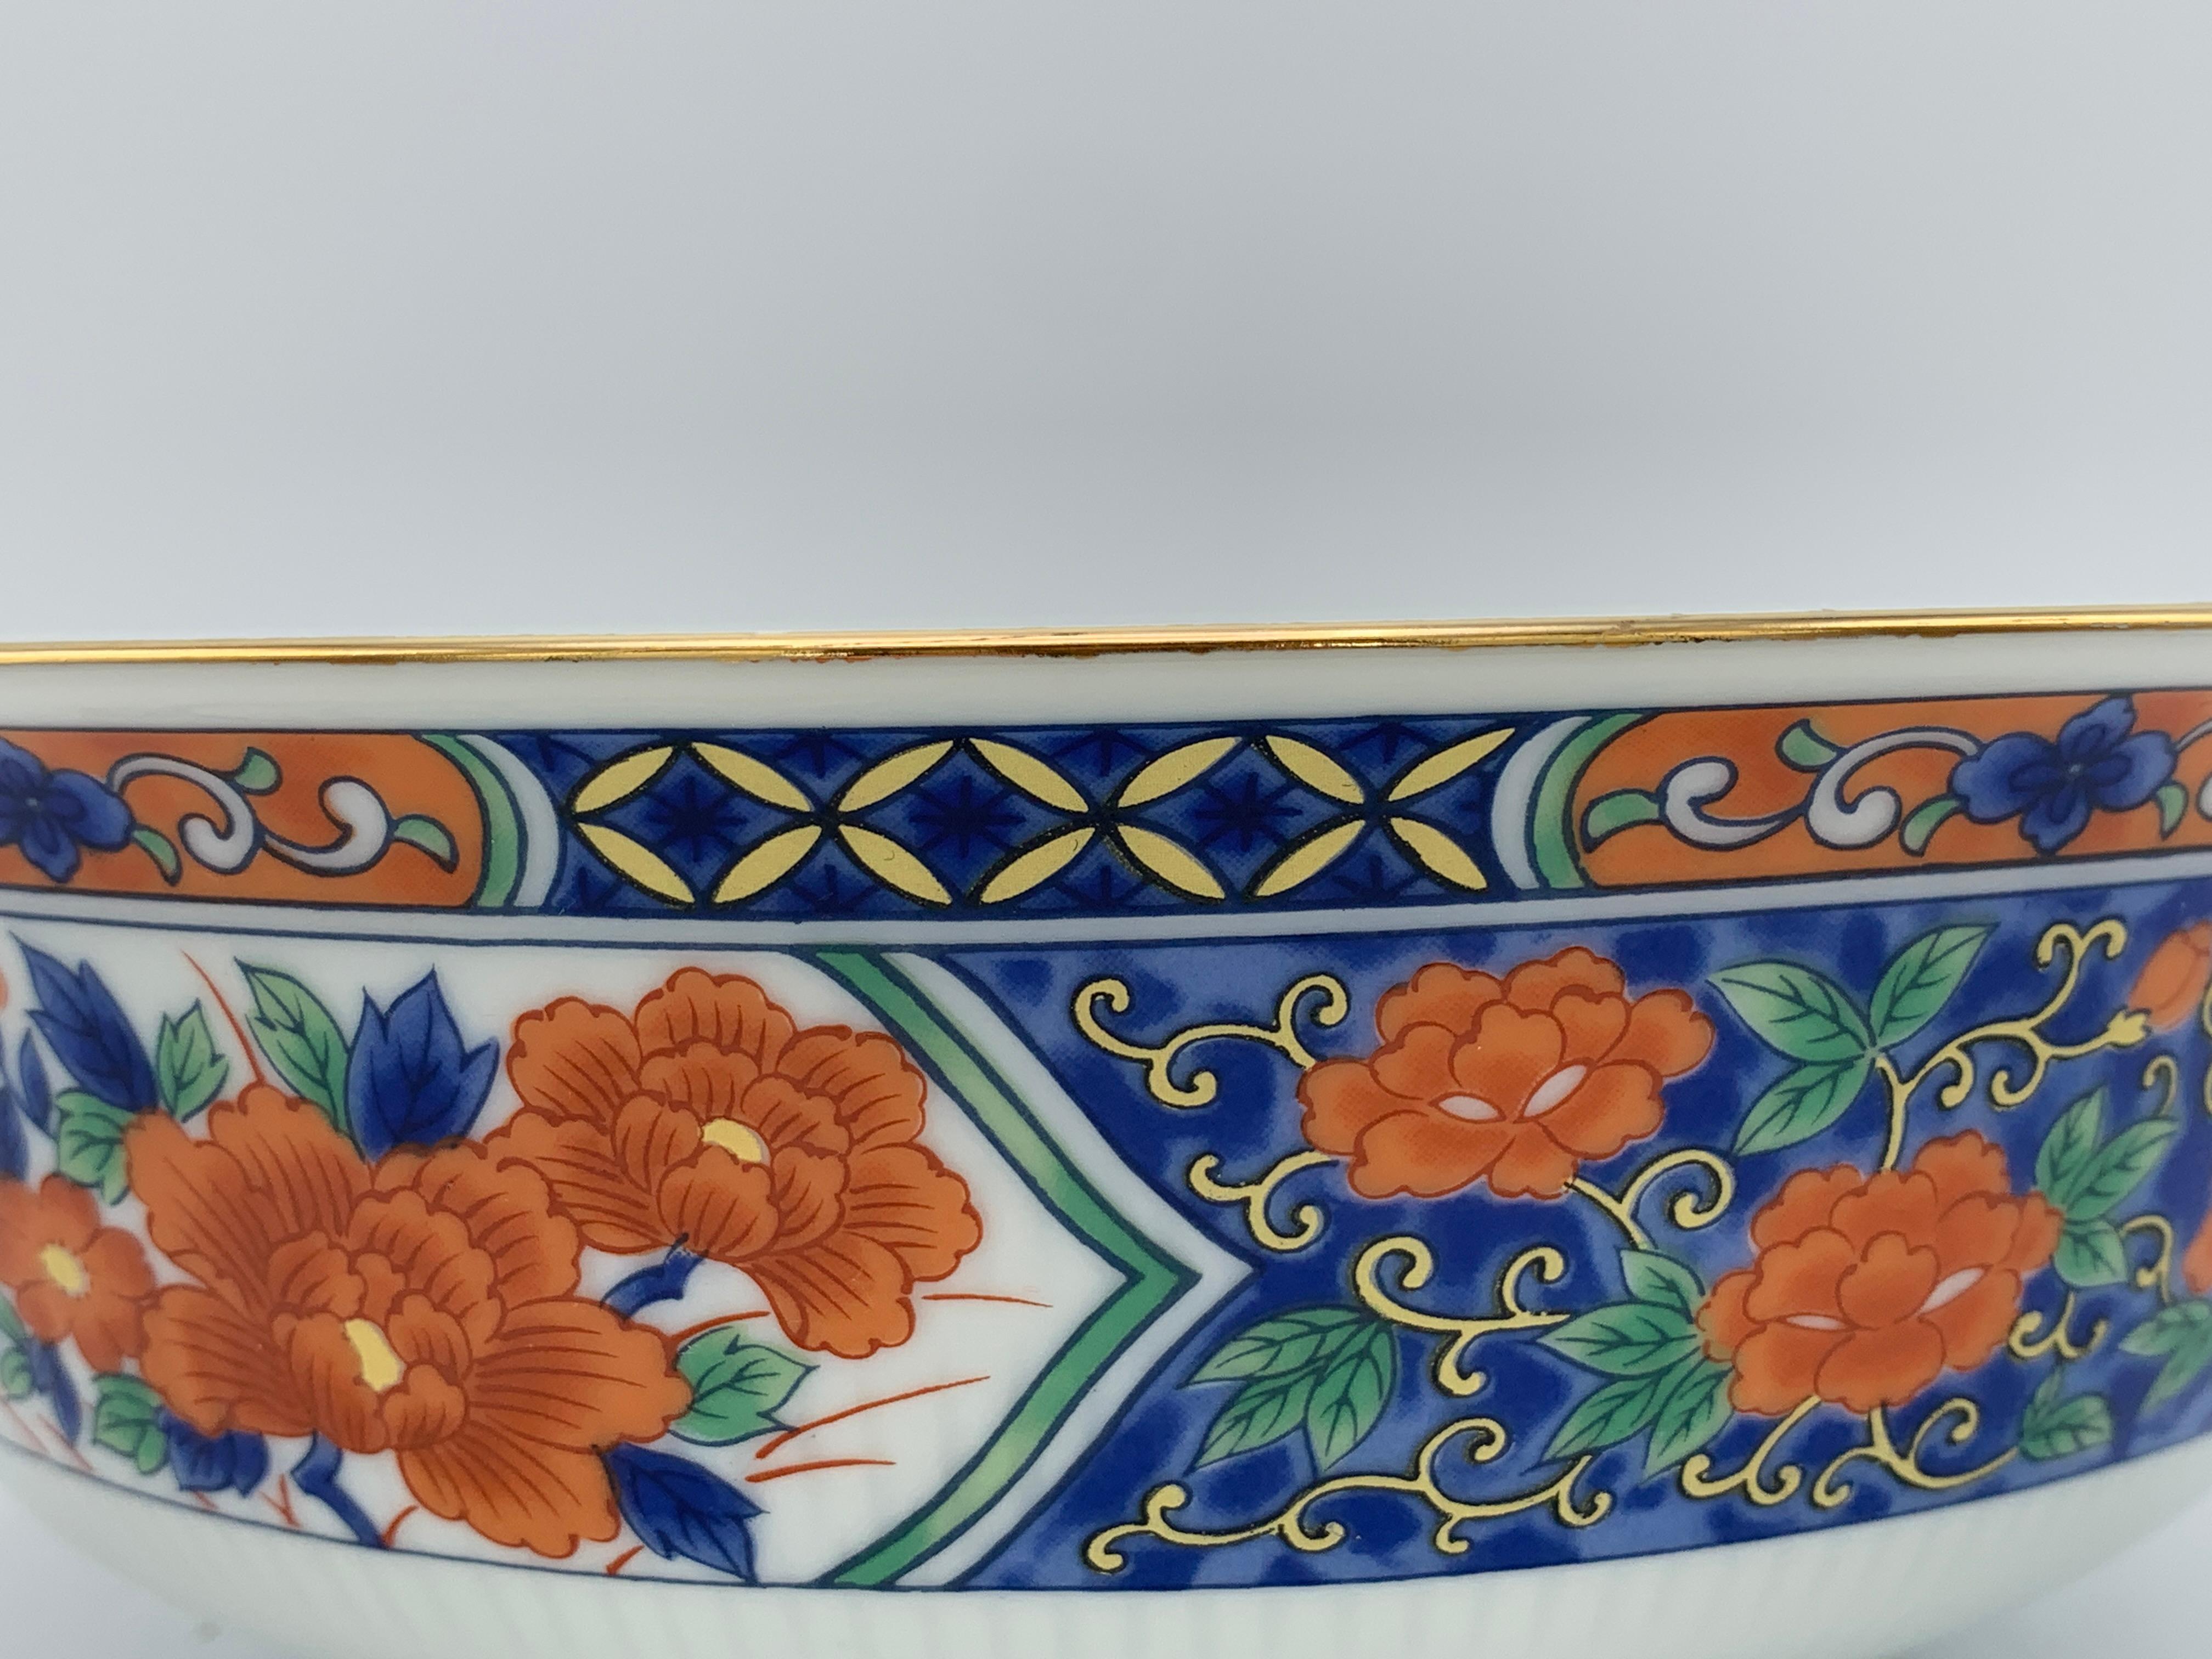 Painted 1970s Tiffany & Co. Chinoiserie Blue and White Imari-Style Catchall Bowl